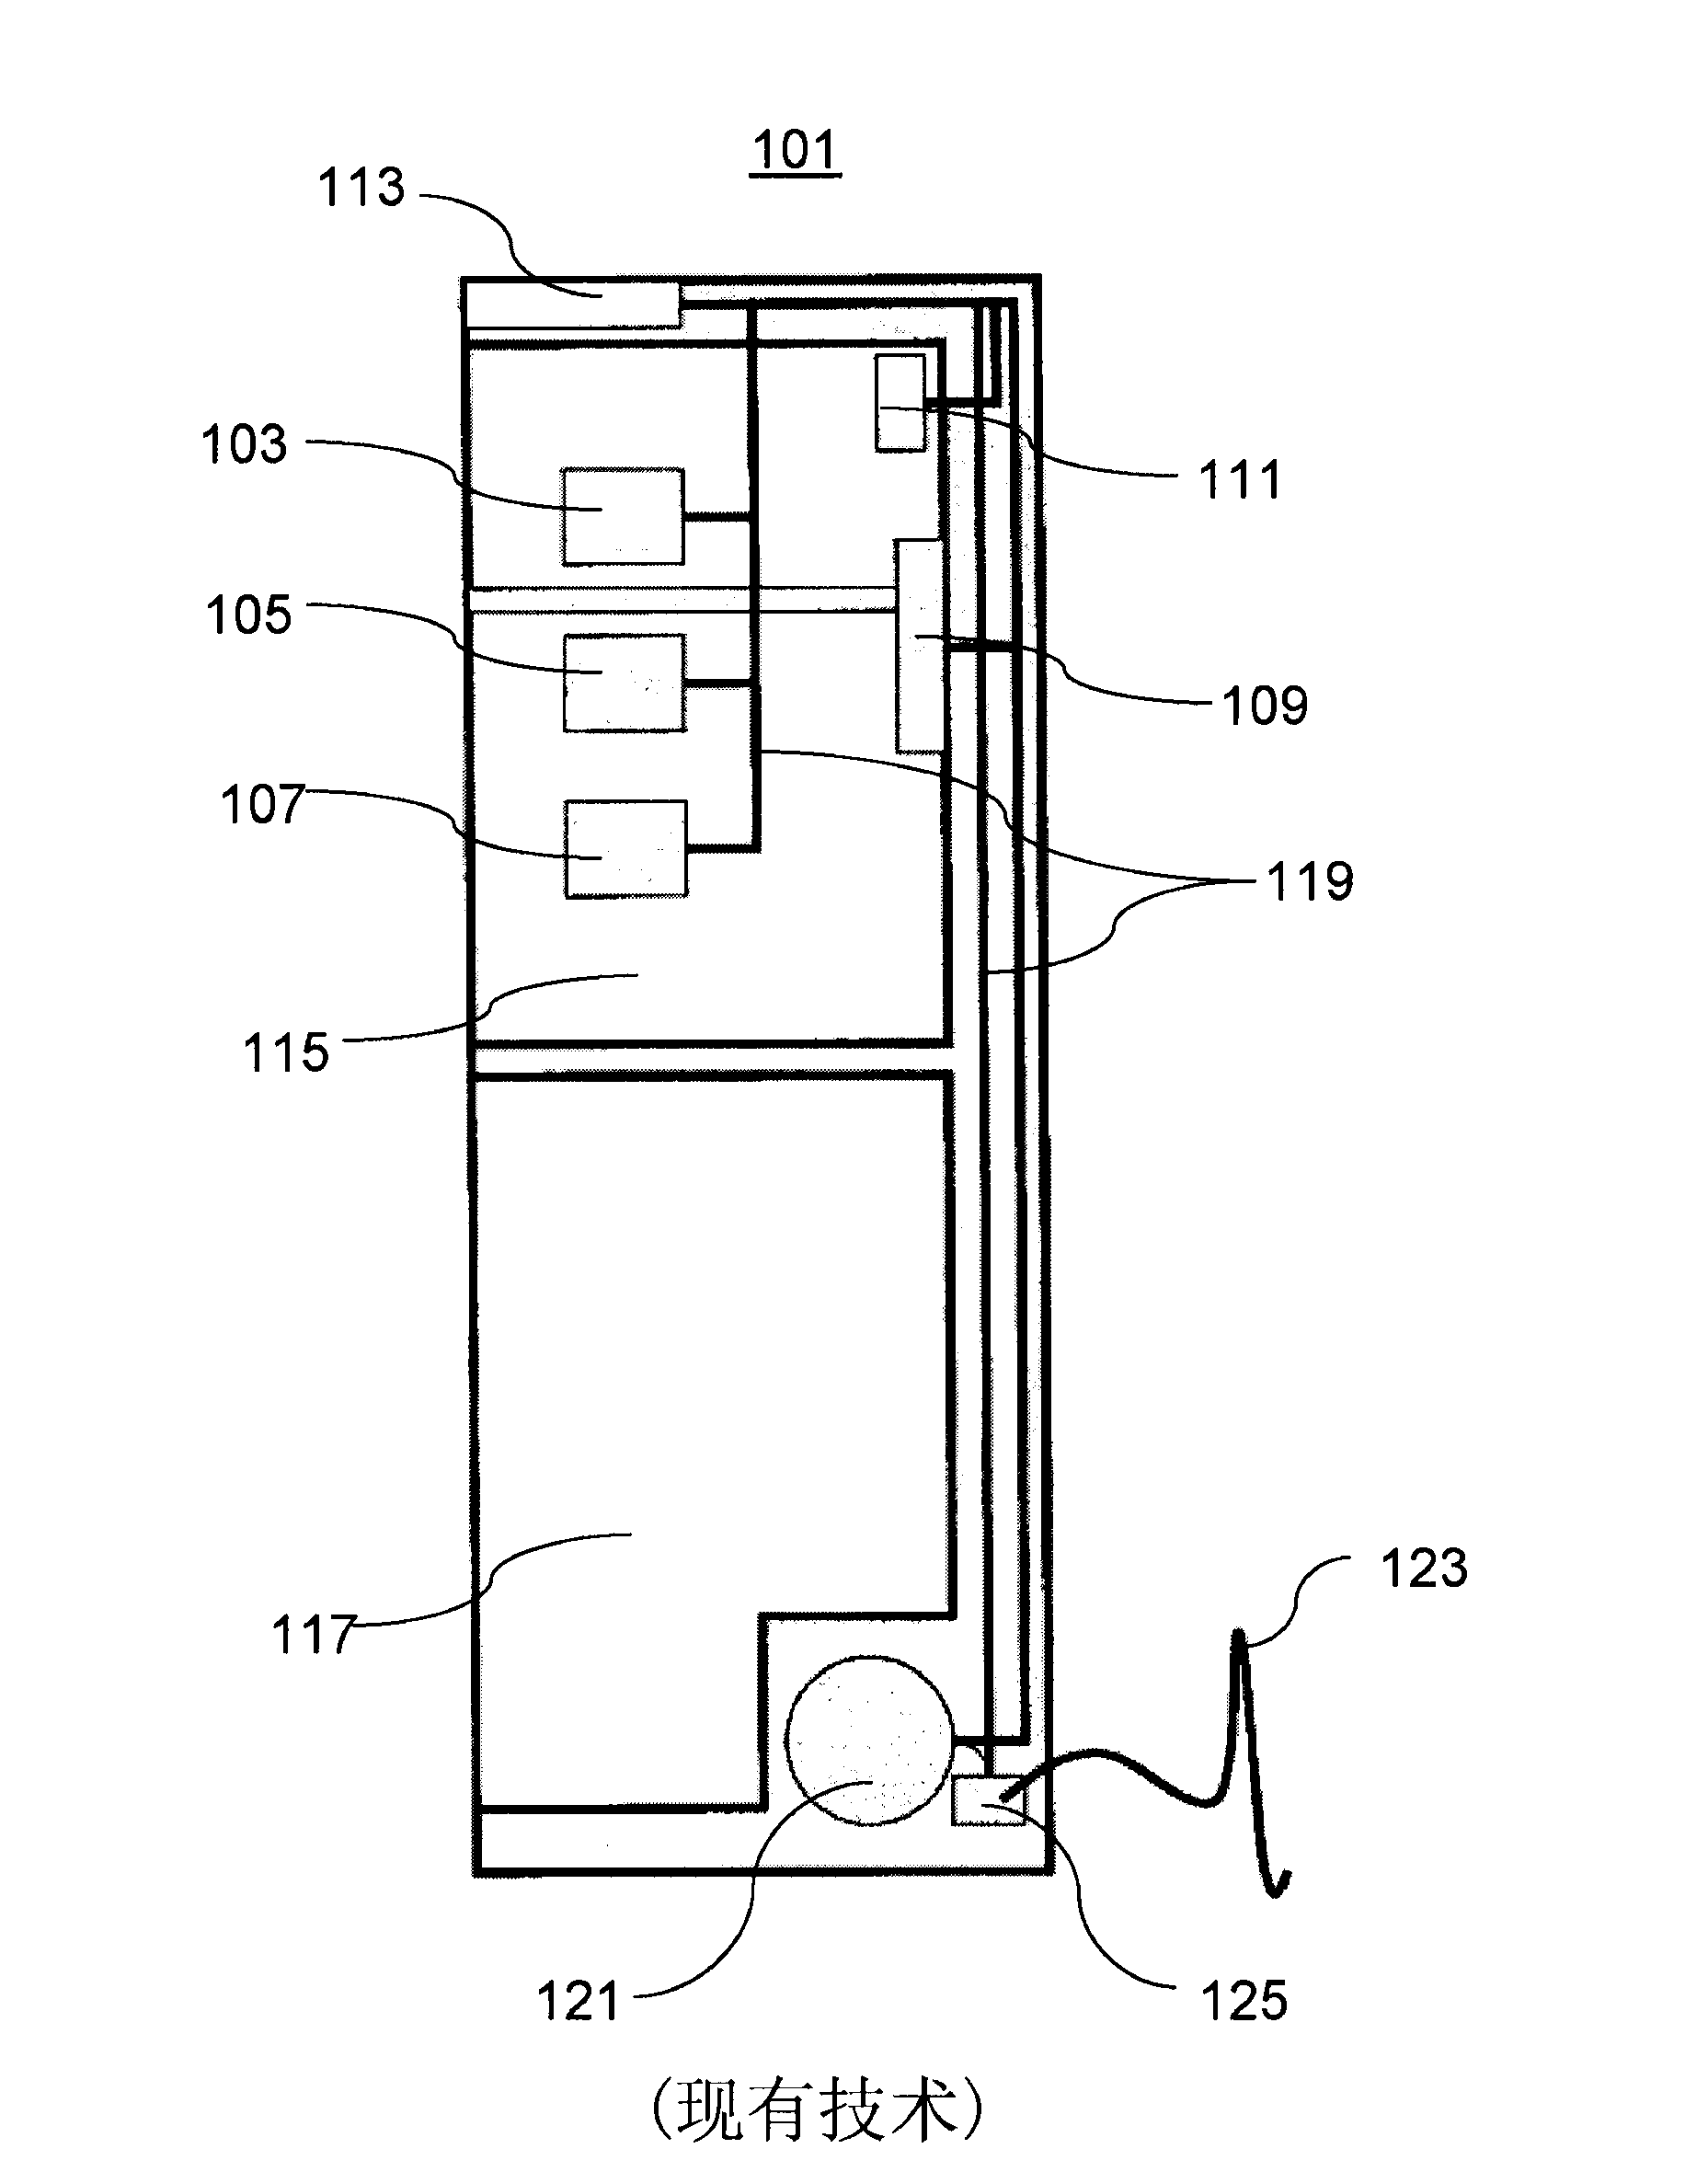 Domestic appliance transmitting electric power to electric equipment unit in directed wireless mode